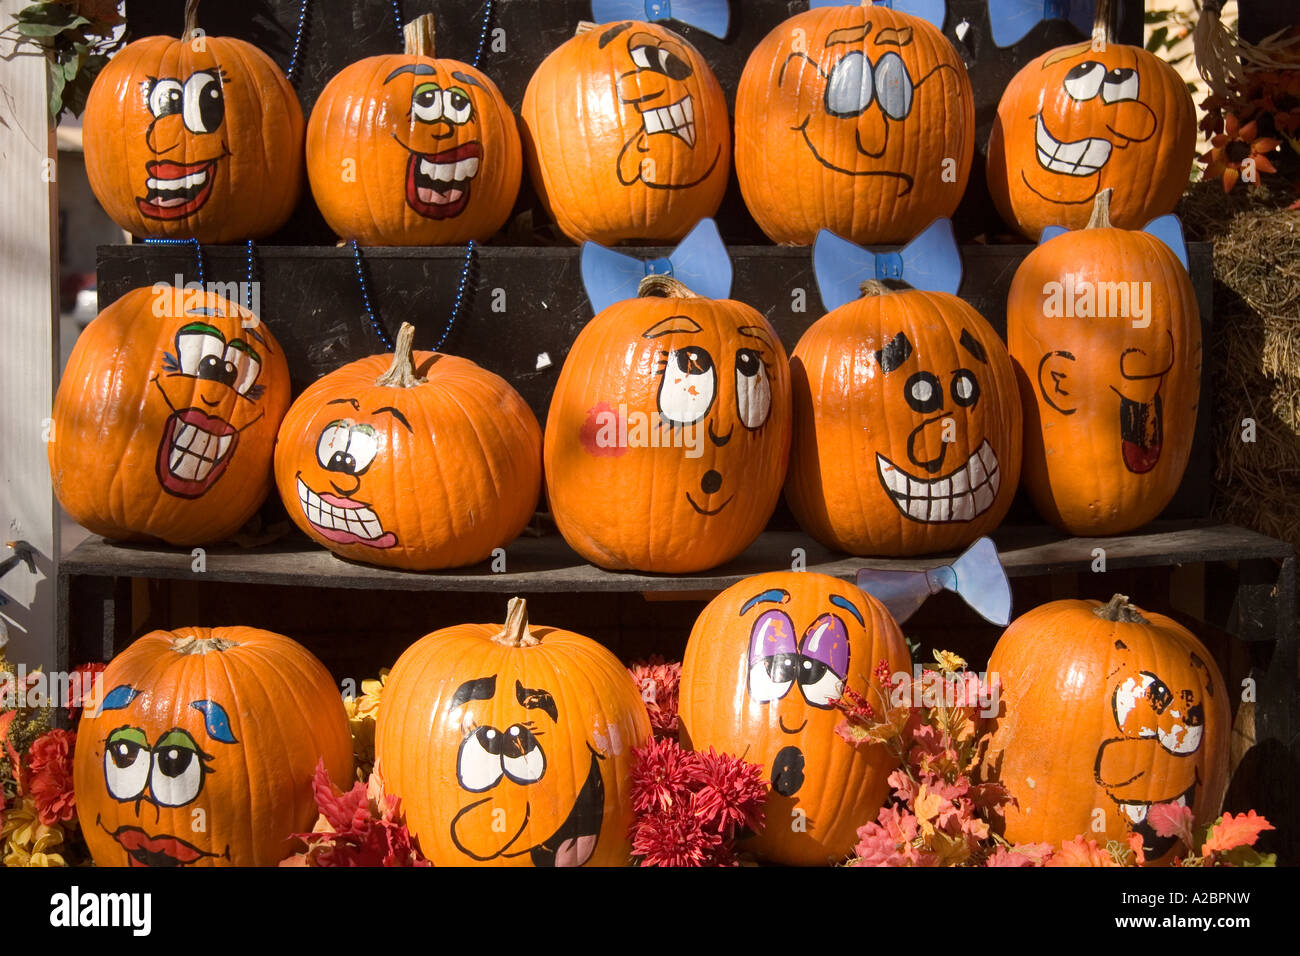 Rustic shelves filled with painted jack o lantern Halloween decorations  Stock Photo - Alamy